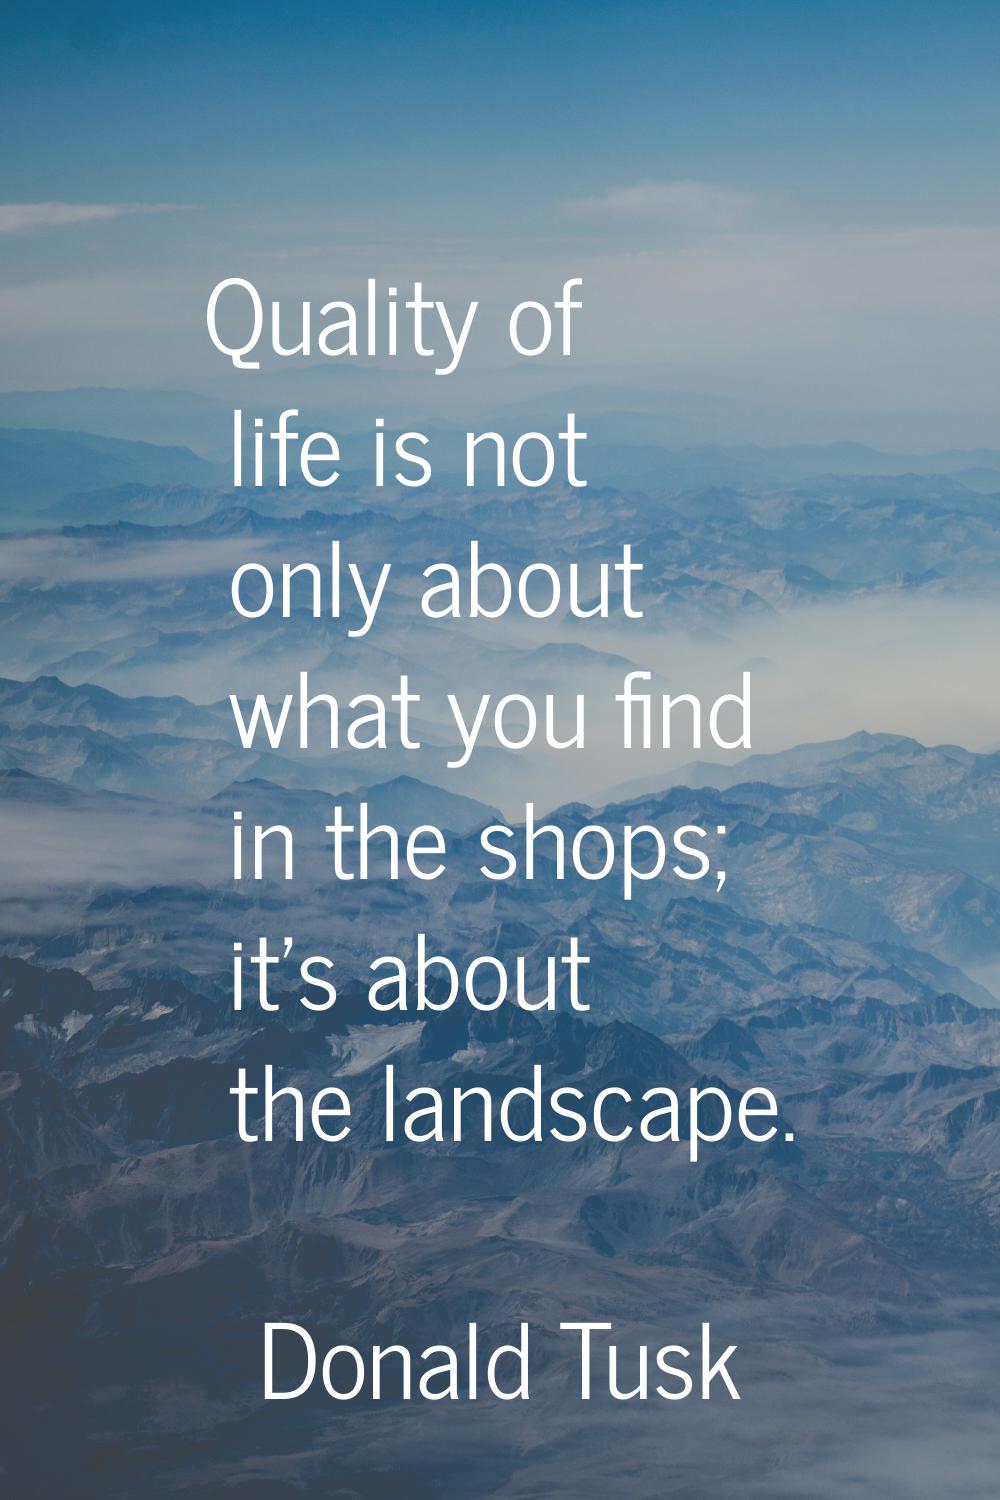 Quality of life is not only about what you find in the shops; it's about the landscape.